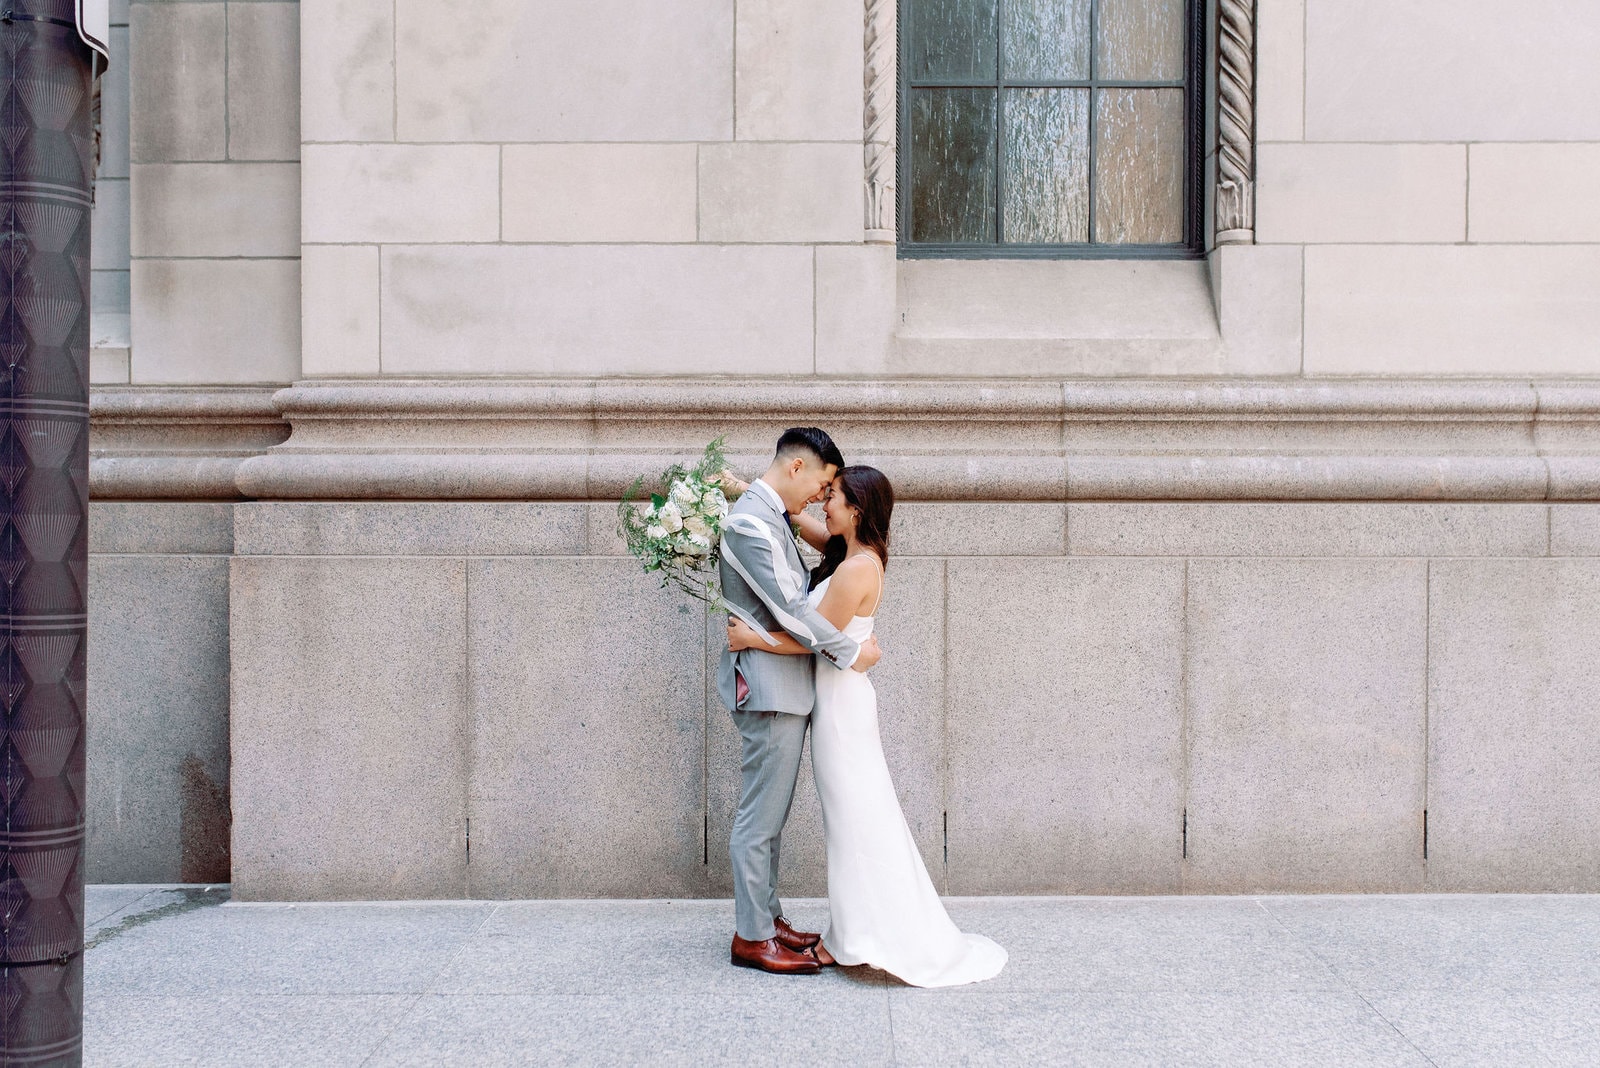 Bride and Groom Editorial Portrait in Financial District Downtown Toronto Wedding Photographer Jacqueline James Photography